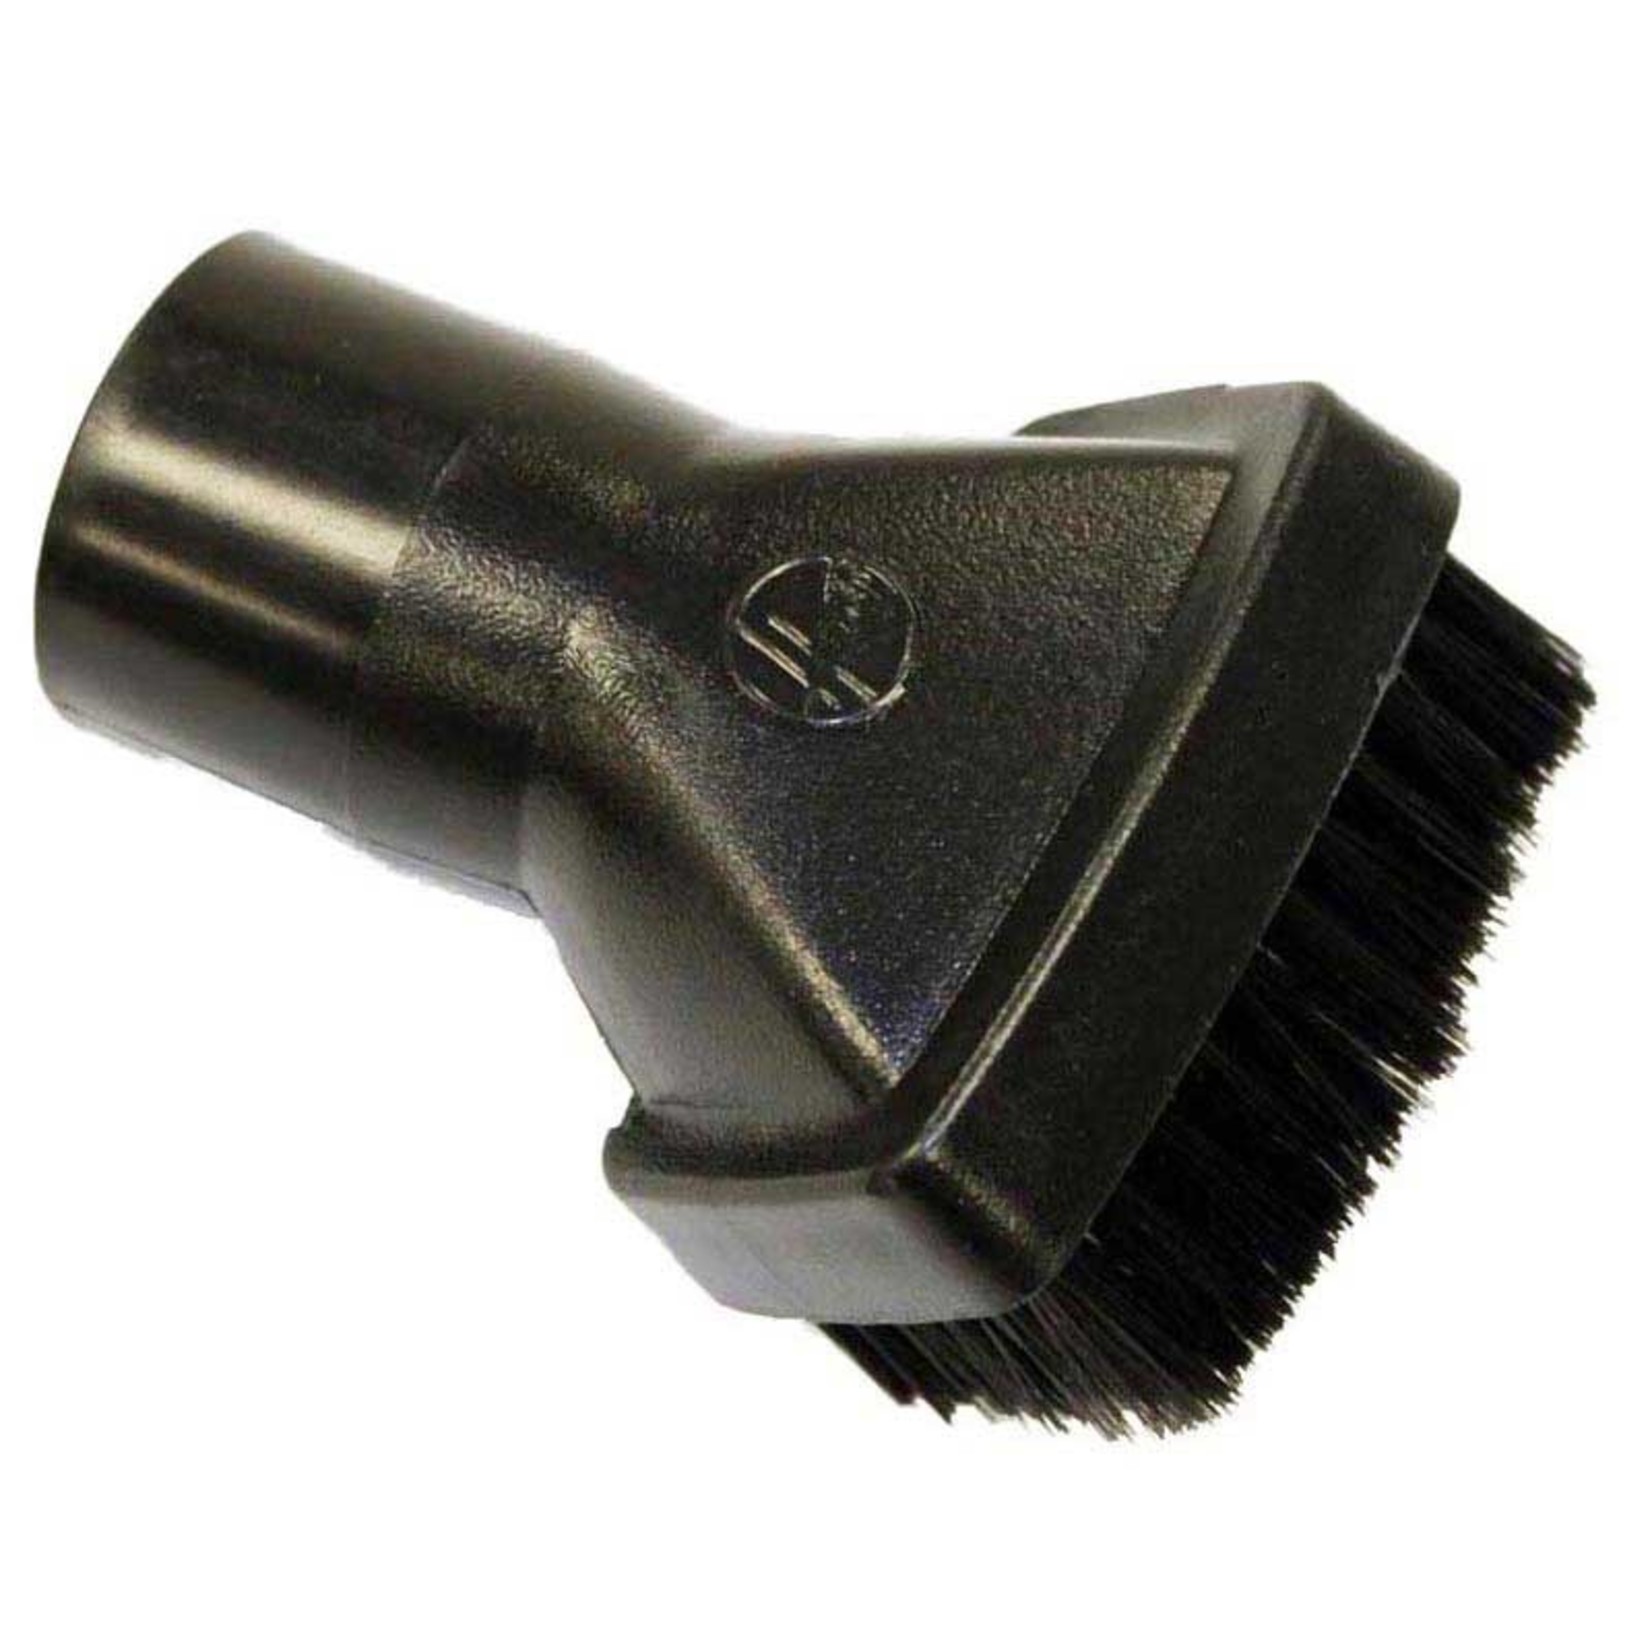 Hoover Hoover Dust Brush, fits Wind Tunnel, Supremacy, Savy, & Empower